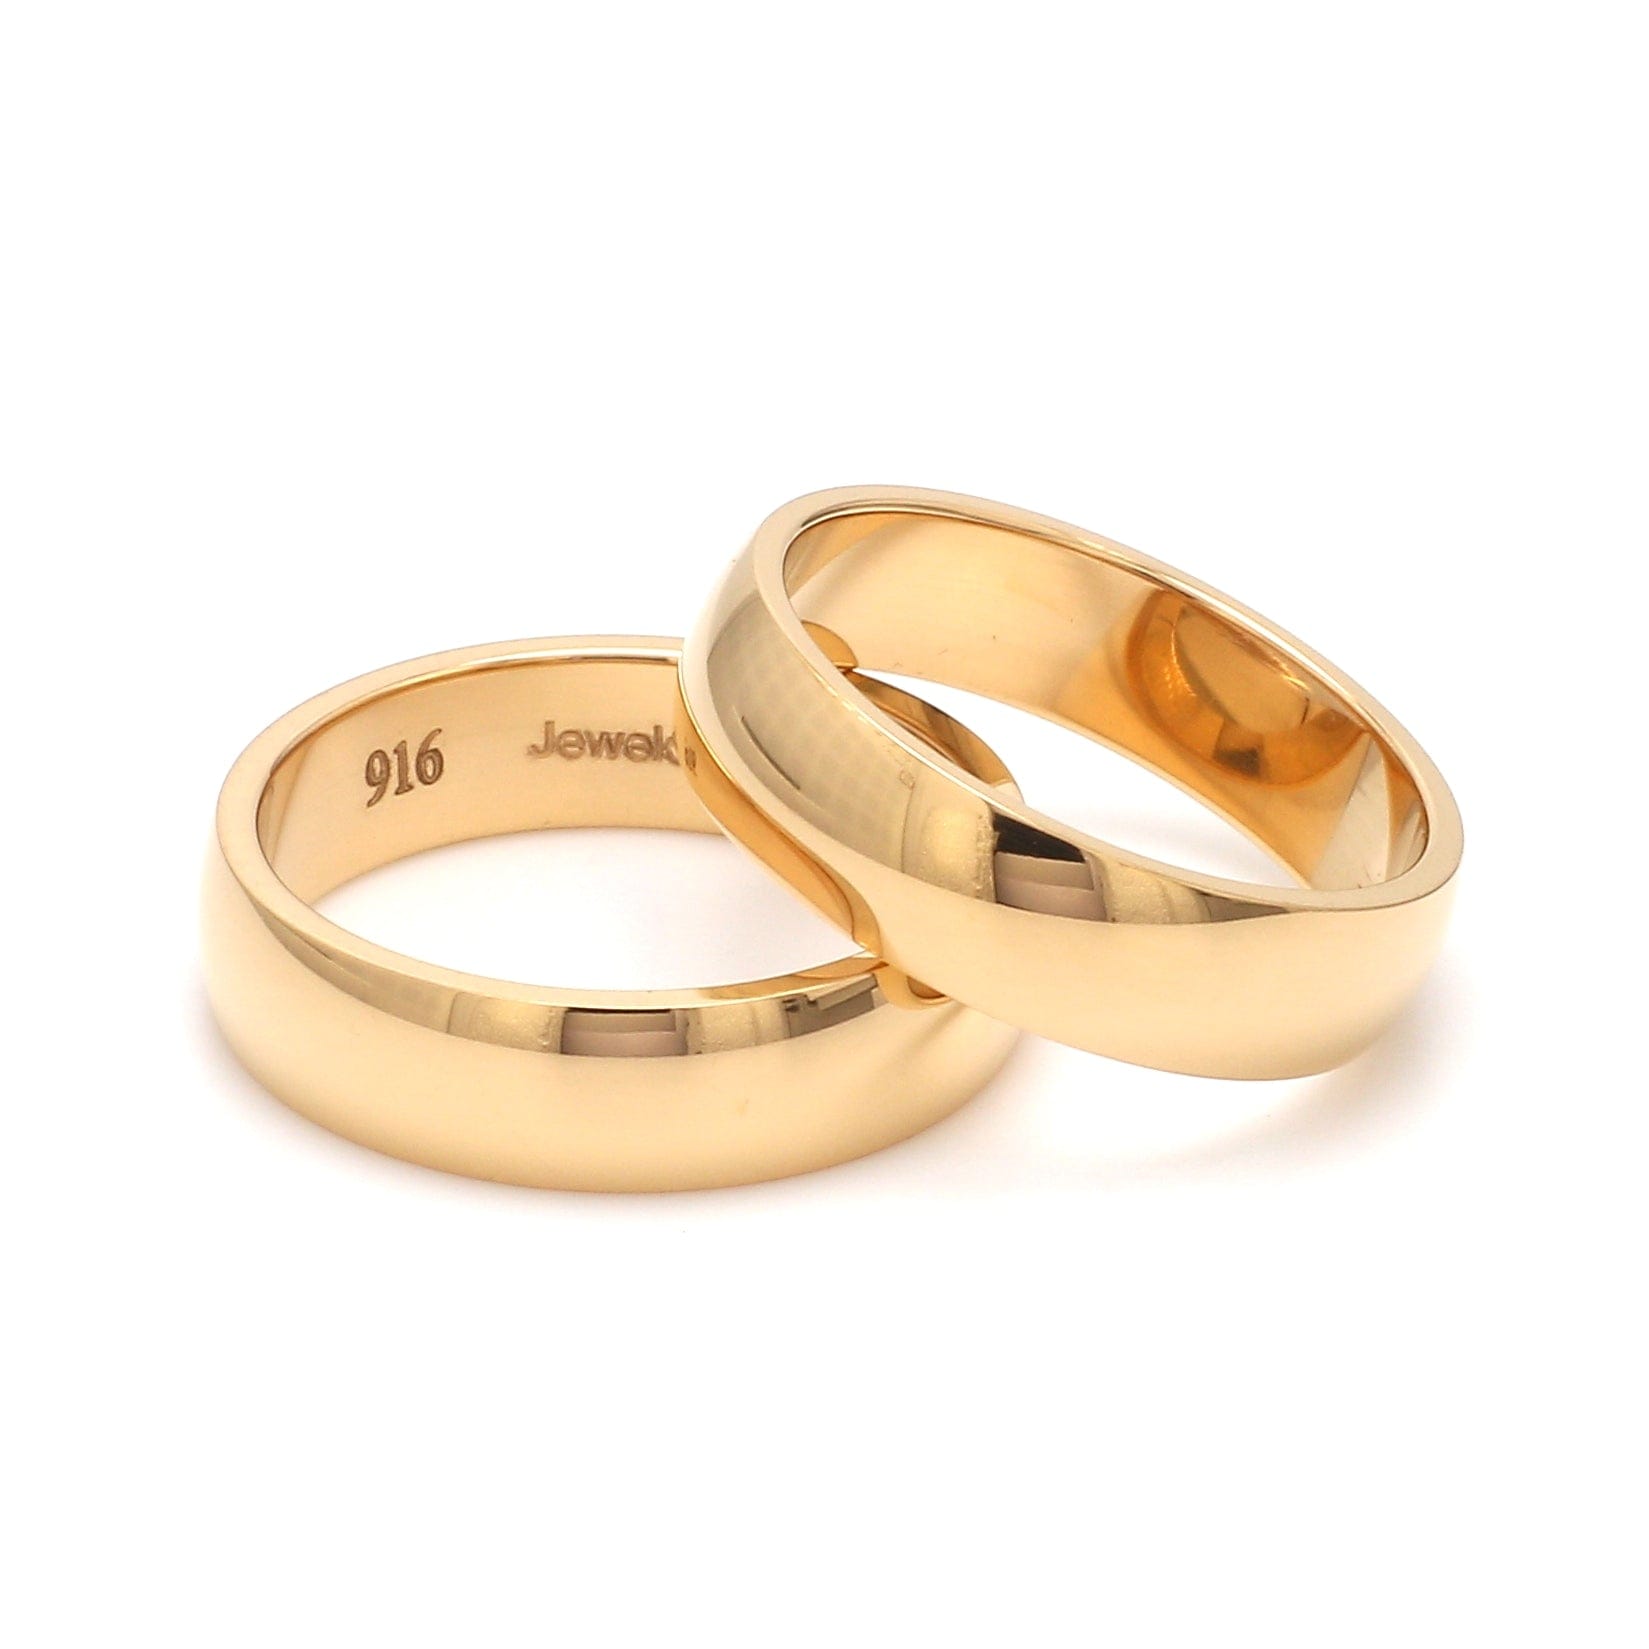 Christian Bauer Wedding Bands - Passion For True Value | Robbins Brothers